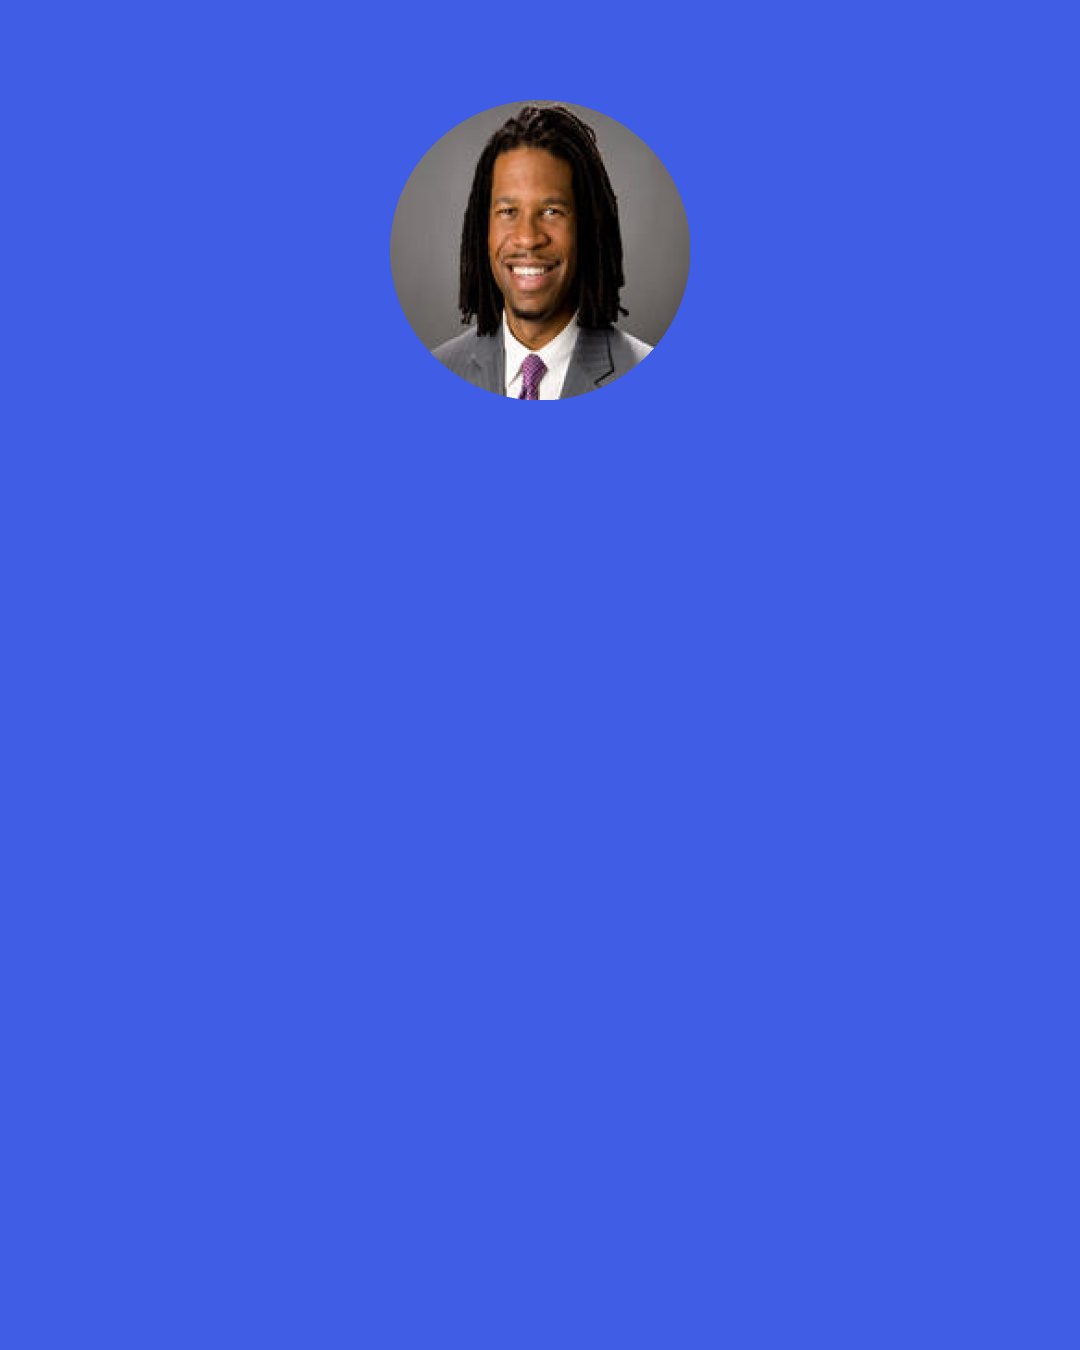 LZ Granderson: When you hear the words ‘gay lifestyle’ and ‘gay agenda’ in the future, [look] to your left, look to your right. That person next to you is a brother, is a sister. And they should be treated with love and respect.